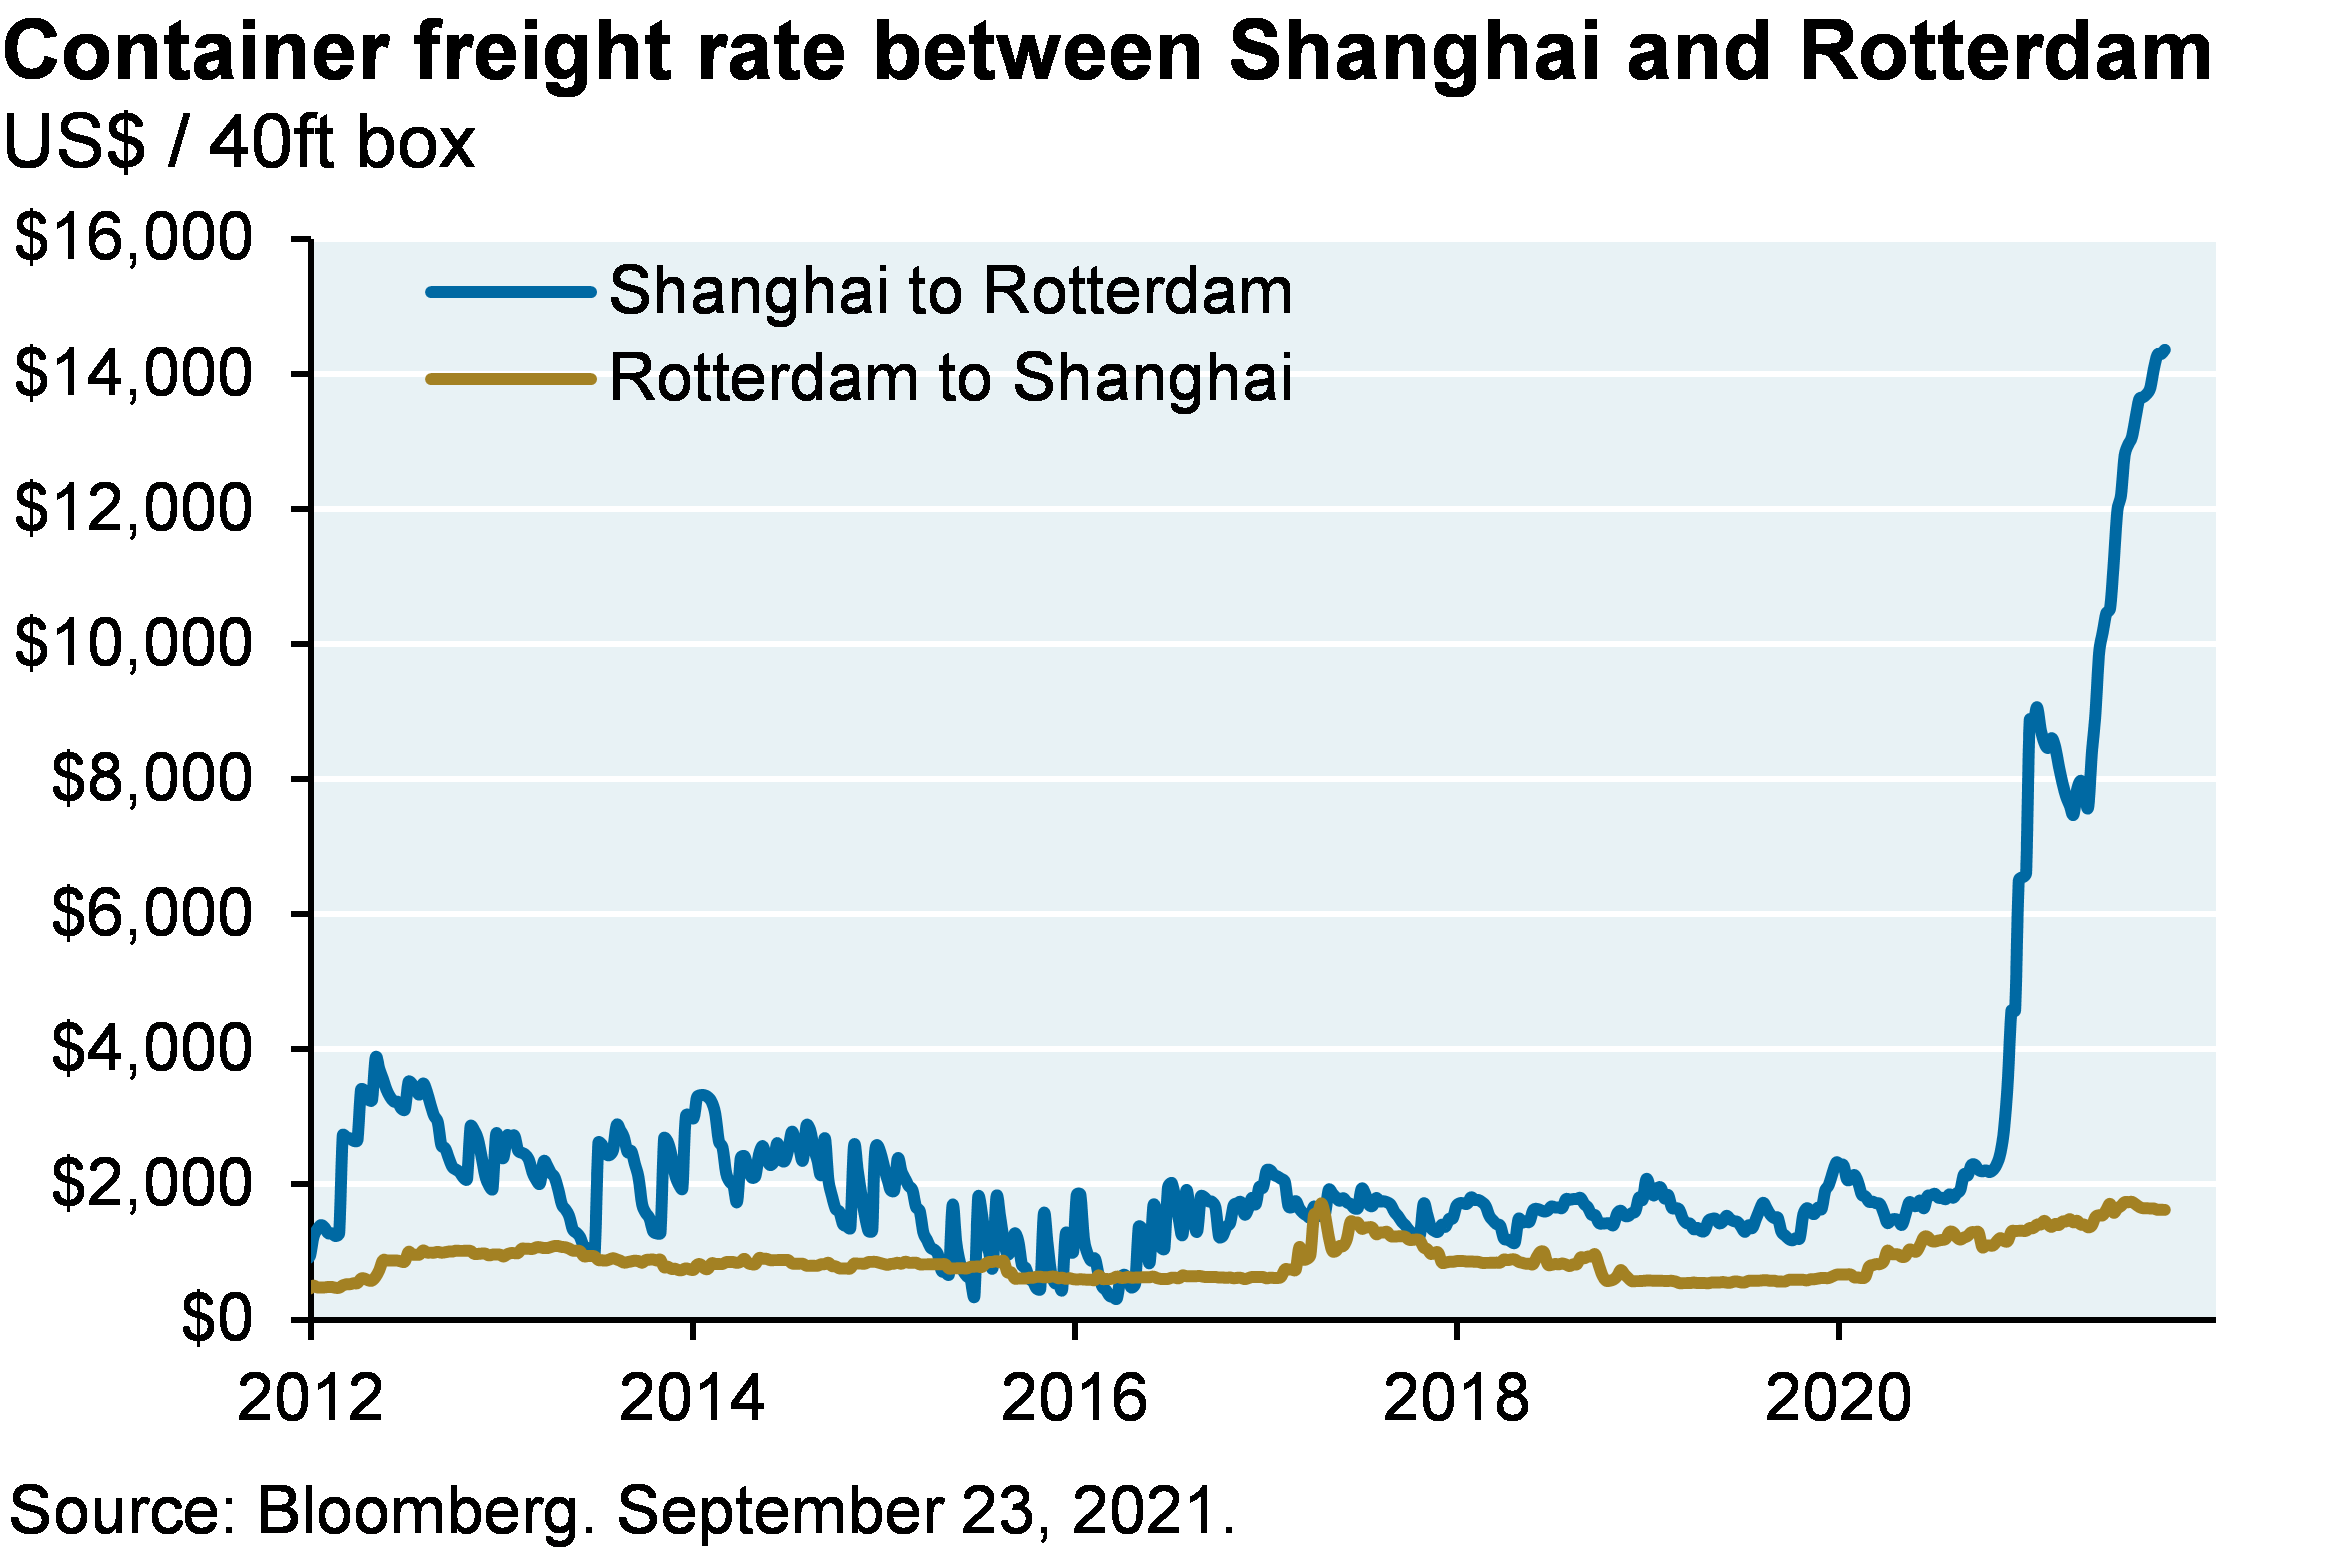 Line chart shows the container freight rate between Shanghai and Rotterdam, shown in US dollars per 40ft box. While the Rotterdam to Shanghai container freight rate has remained steady since 2012 (though with a small recent uptick), the Shanghai to Rotterdam freight rate has spiked from a normal value of around $2,000 to a most recent peak of over $14,000 per 40ft box.